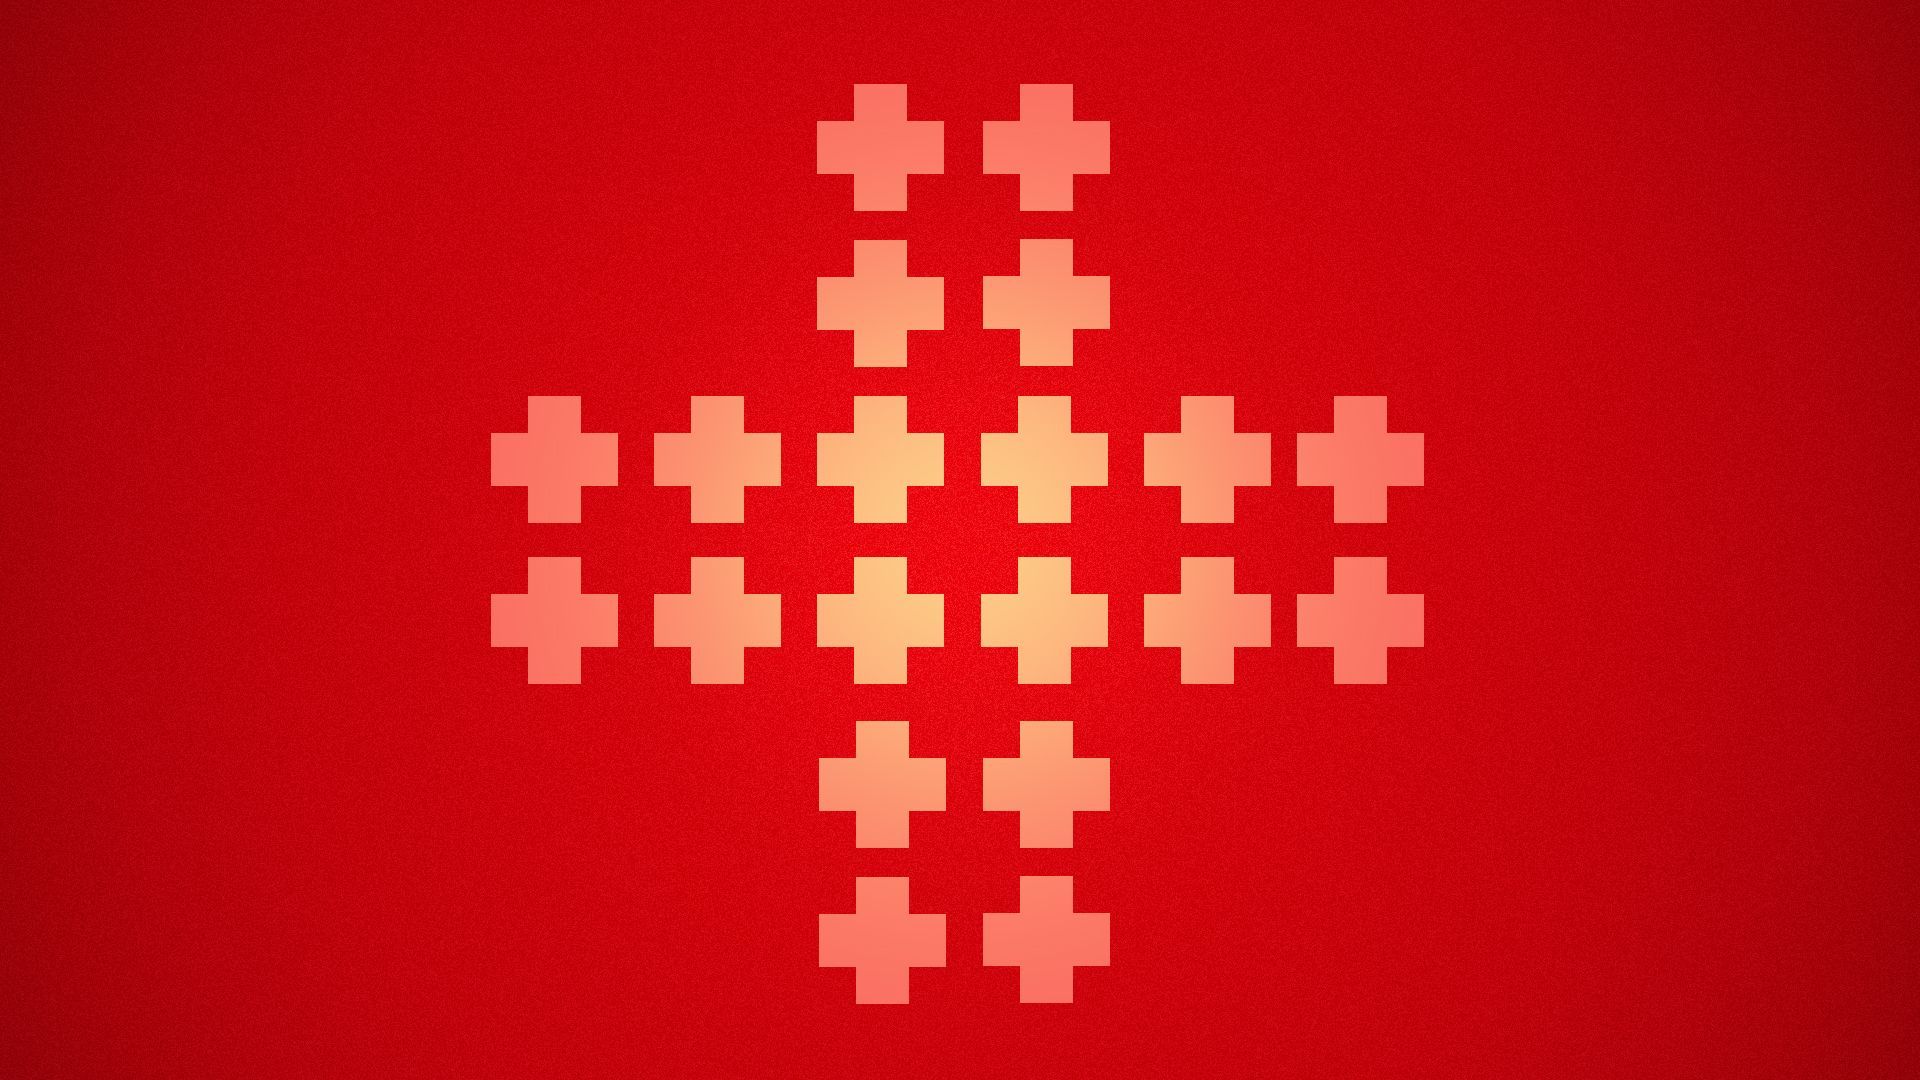 Illustration of small red crosses forming a larger one.